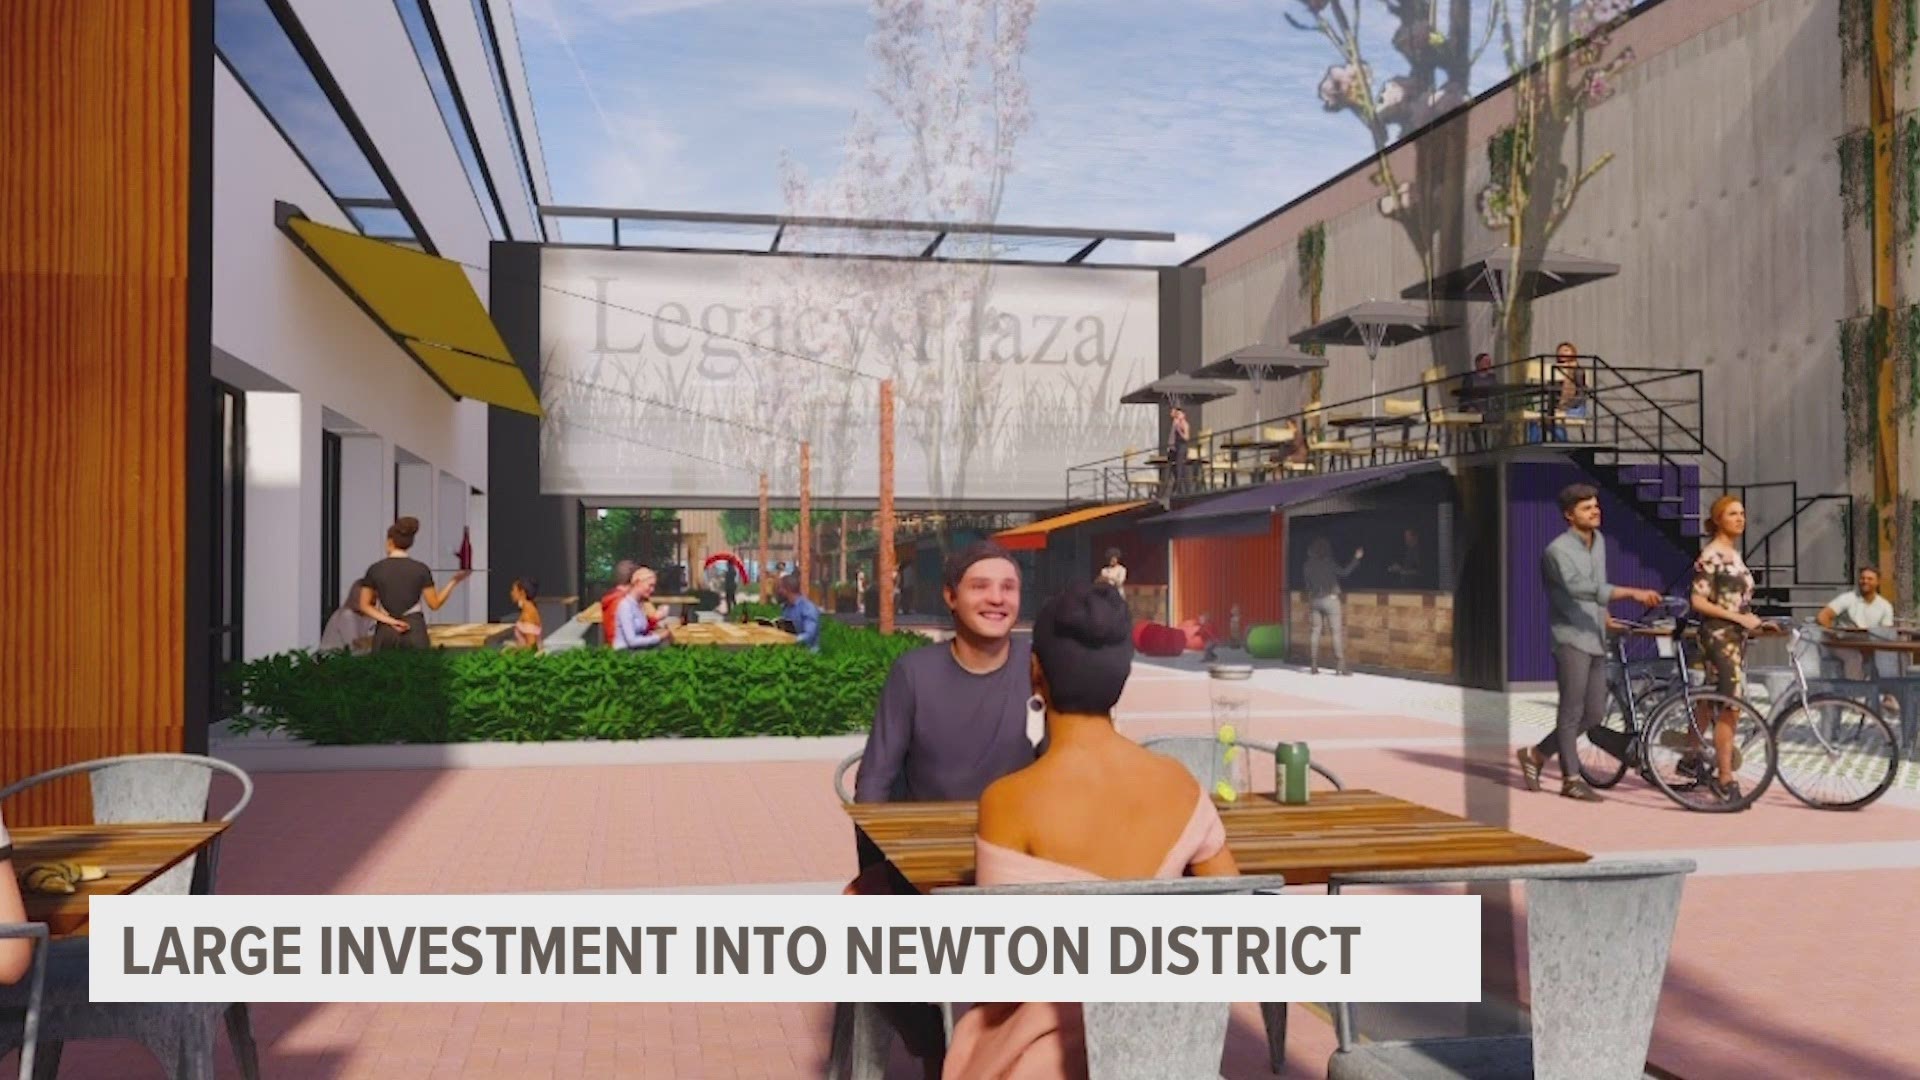 The Newton Legacy Reinvestment District is expected to generate $21 million in revenue over 20 years.